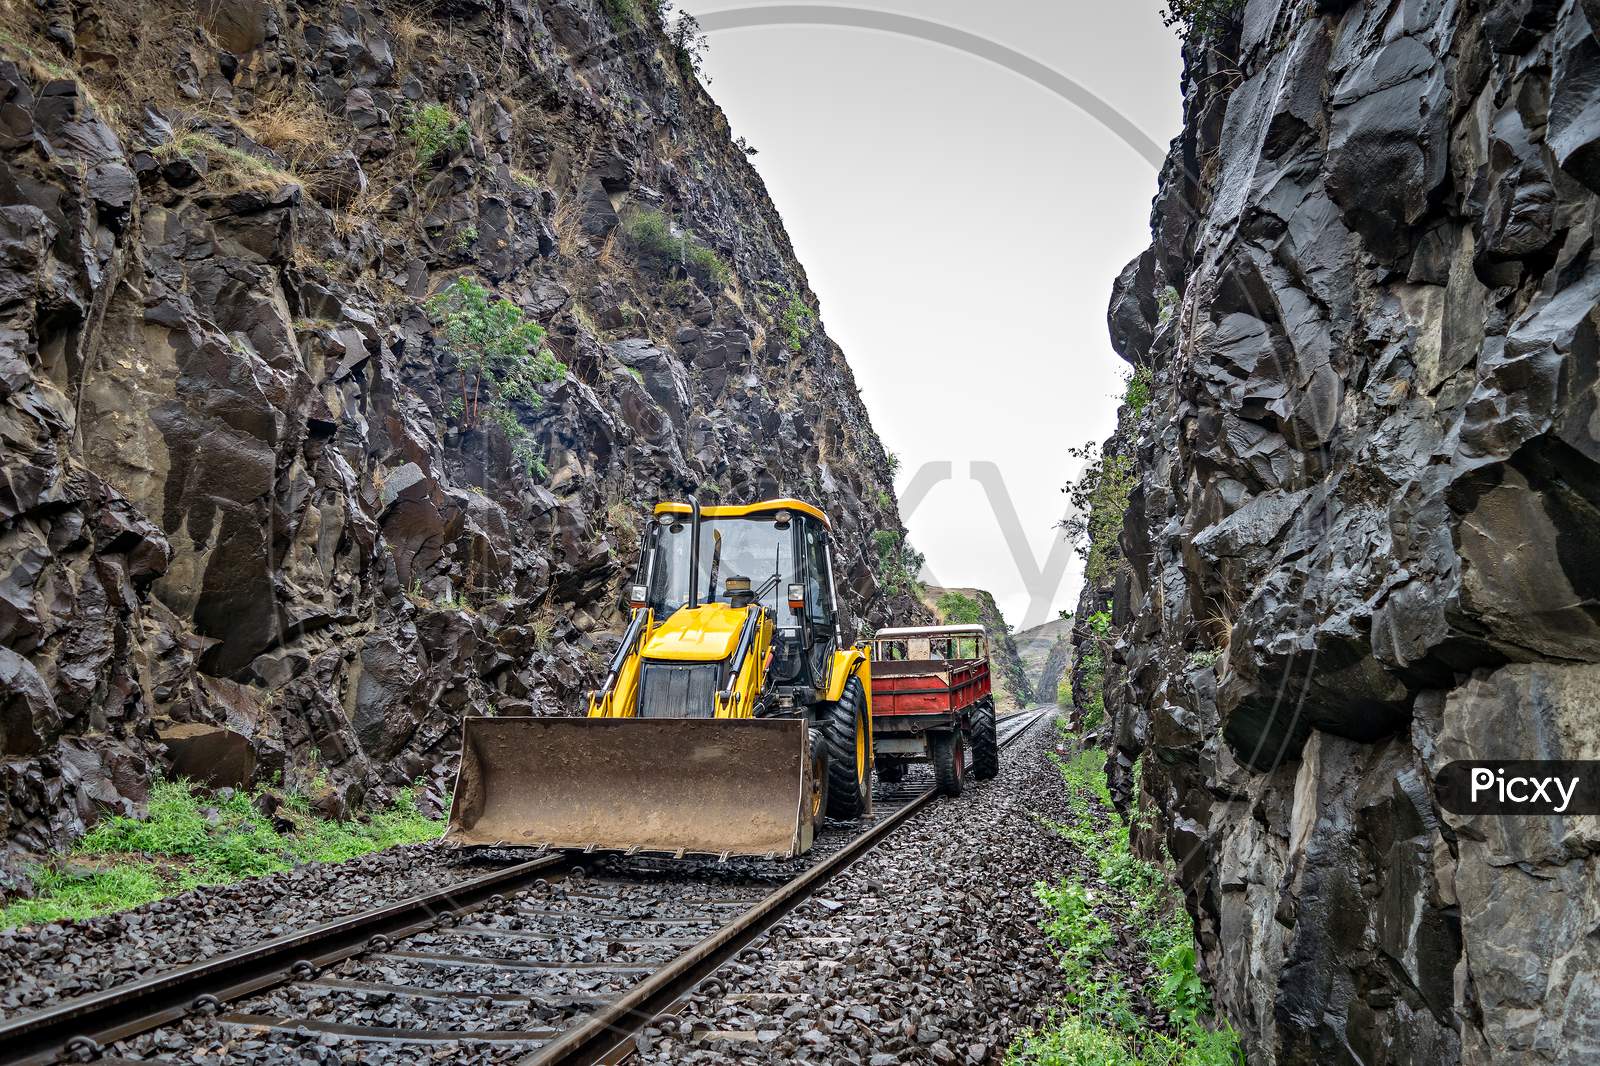 Equipment For Removing Vulnerable Rocks On The Side Of Railway Track.